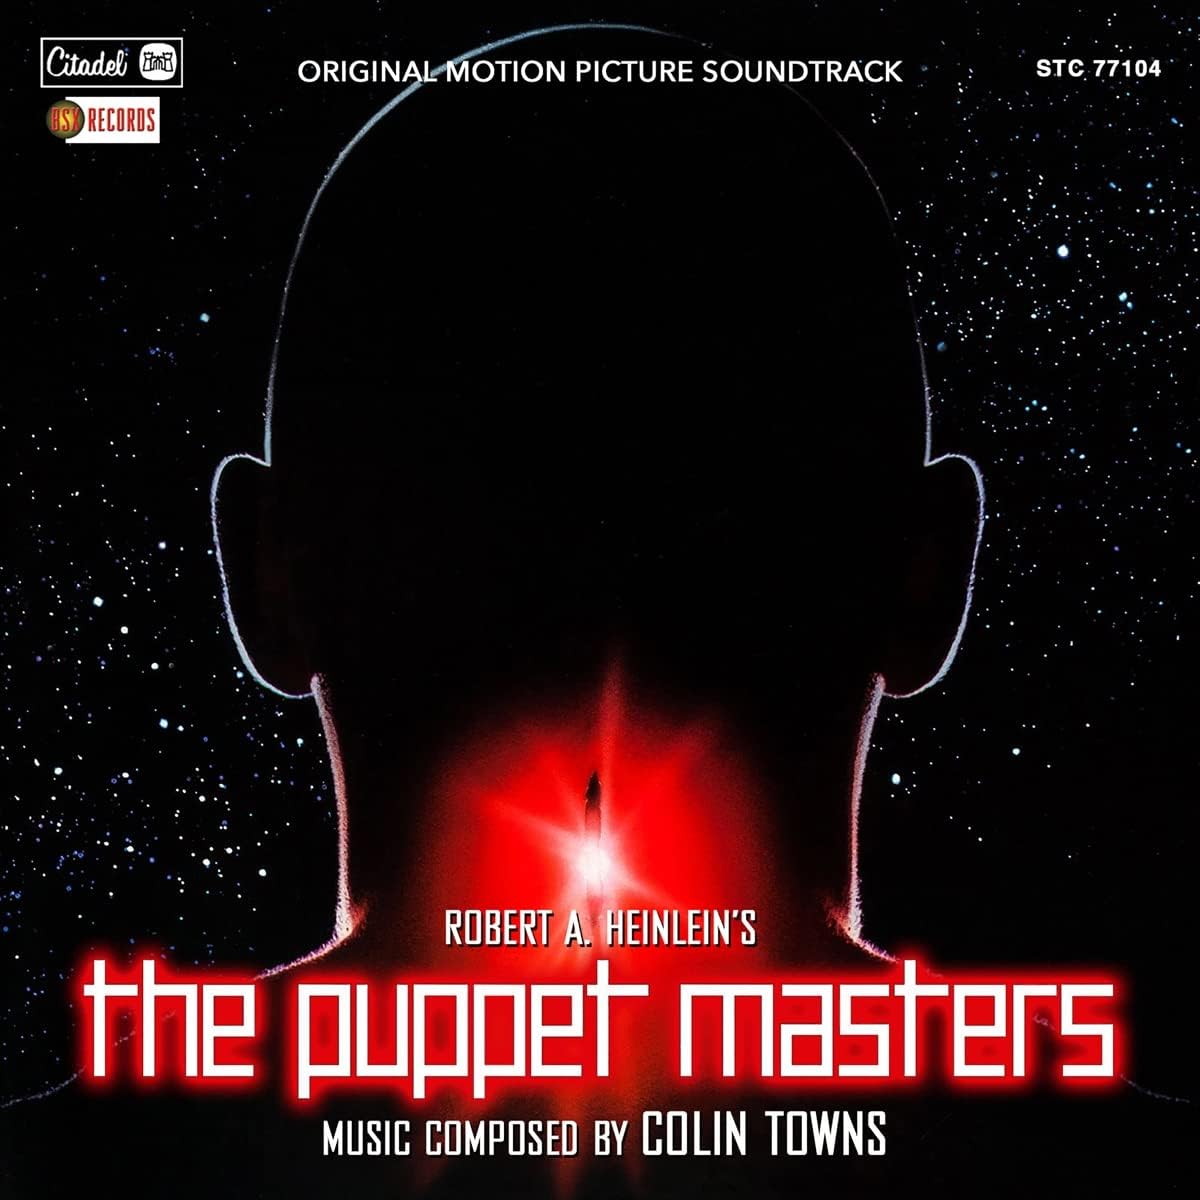 Colin Towns ƒ?? The Puppet Masters: Original Motion Picture Soundtrack (1994, CD)